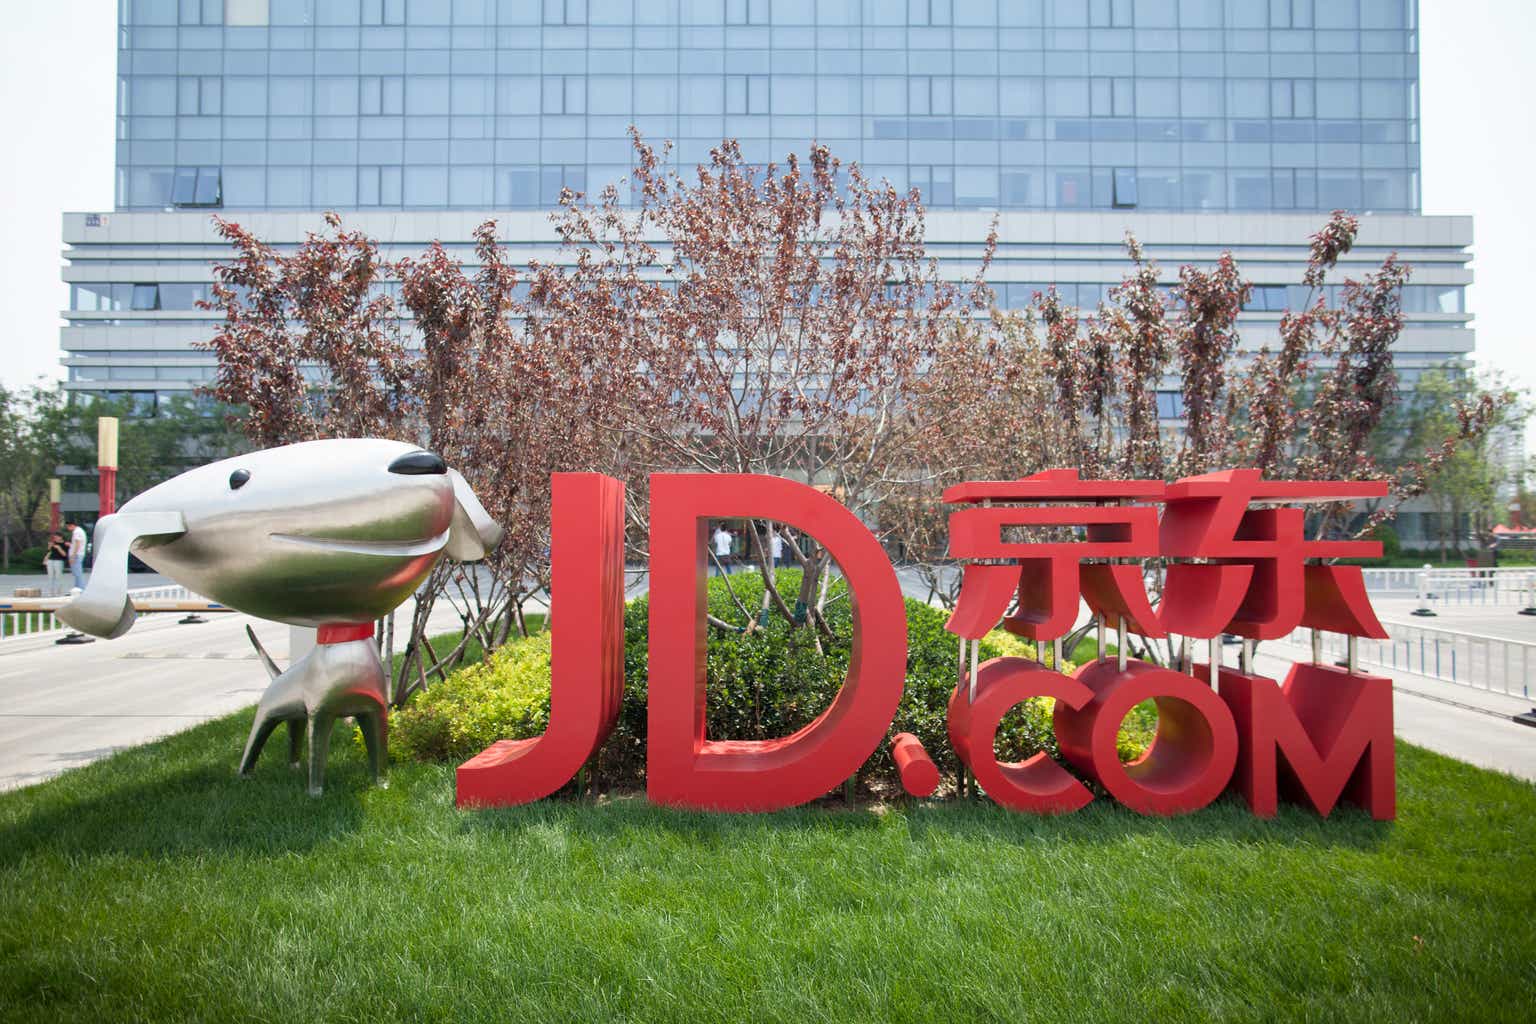 How Chinese tech giant JD.com delivers 90% of packages within a day